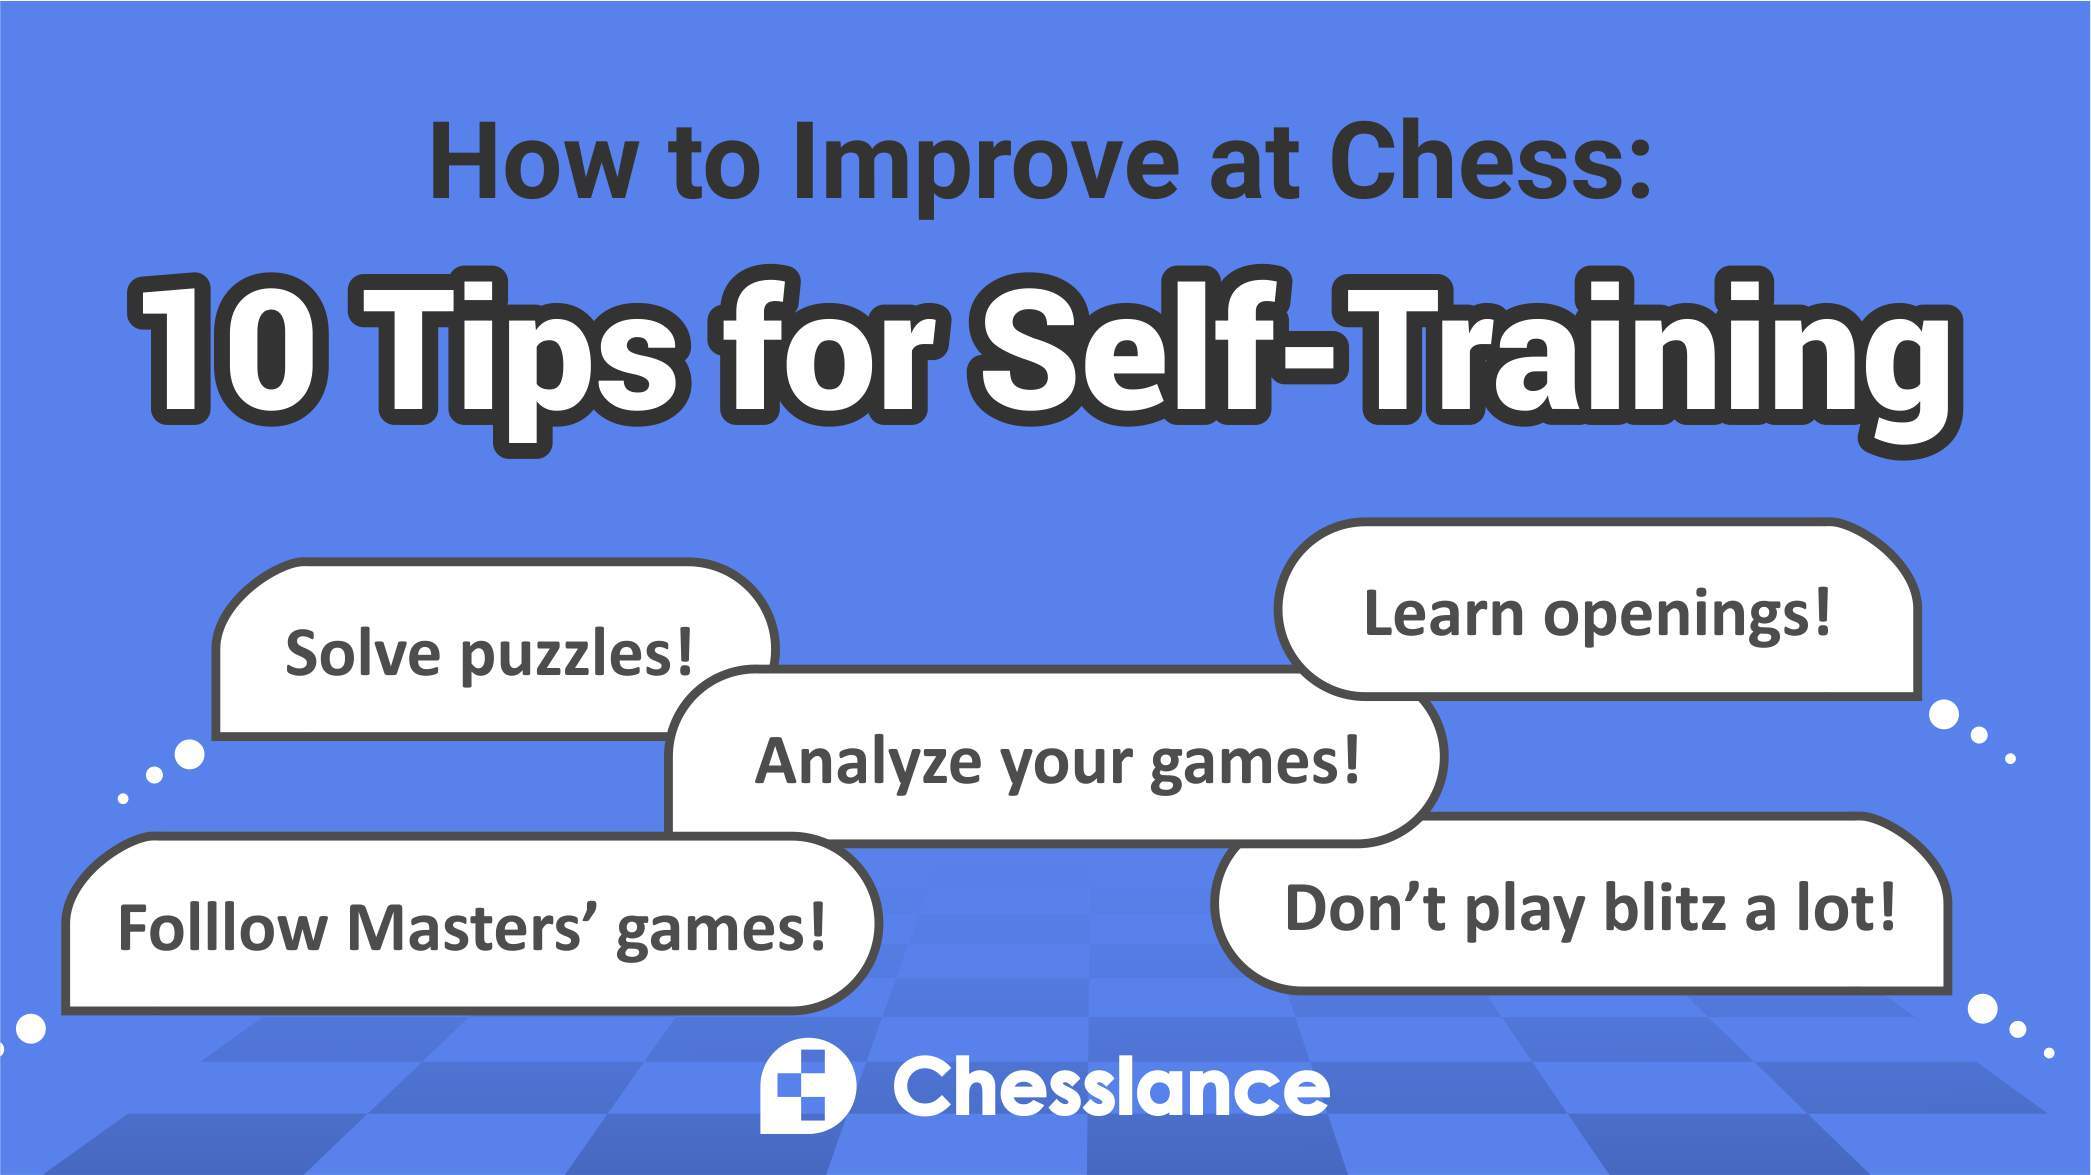 10 Tips for Self-Training : How to improve at chess?